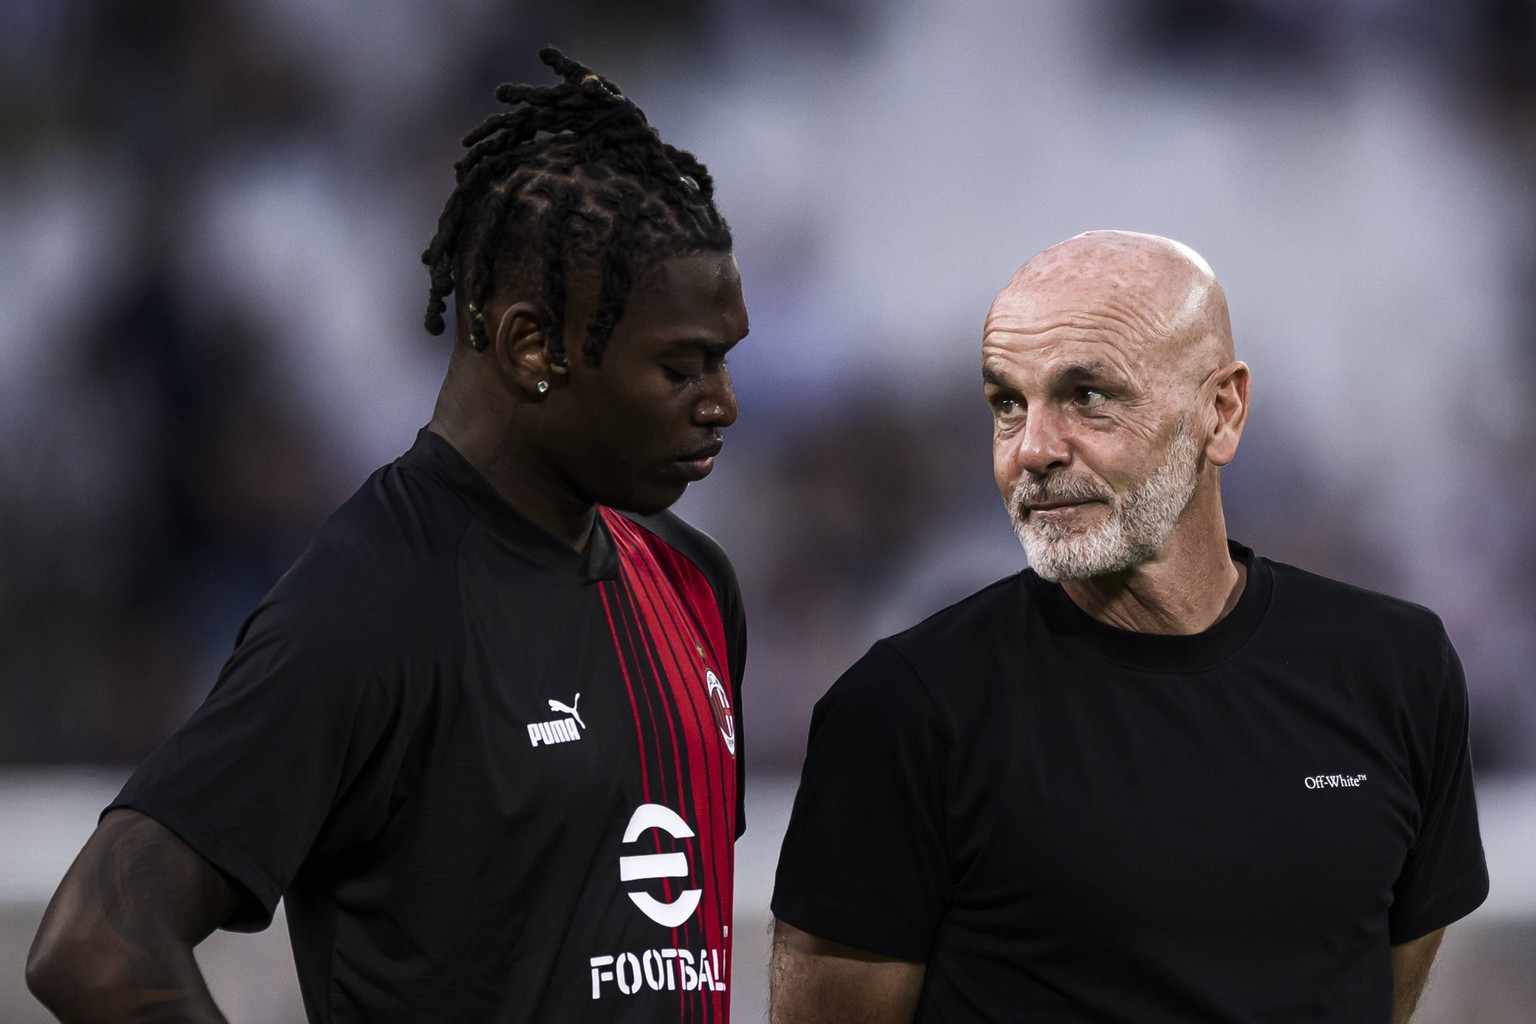 Juventus FC v AC Milan - Serie A Stefano Pioli, head coach of AC Milan, speaks with Rafael Leao of AC Milan prior to the Serie A football match between Juventus FC and AC Milan. Turin Italy Copyright: ...